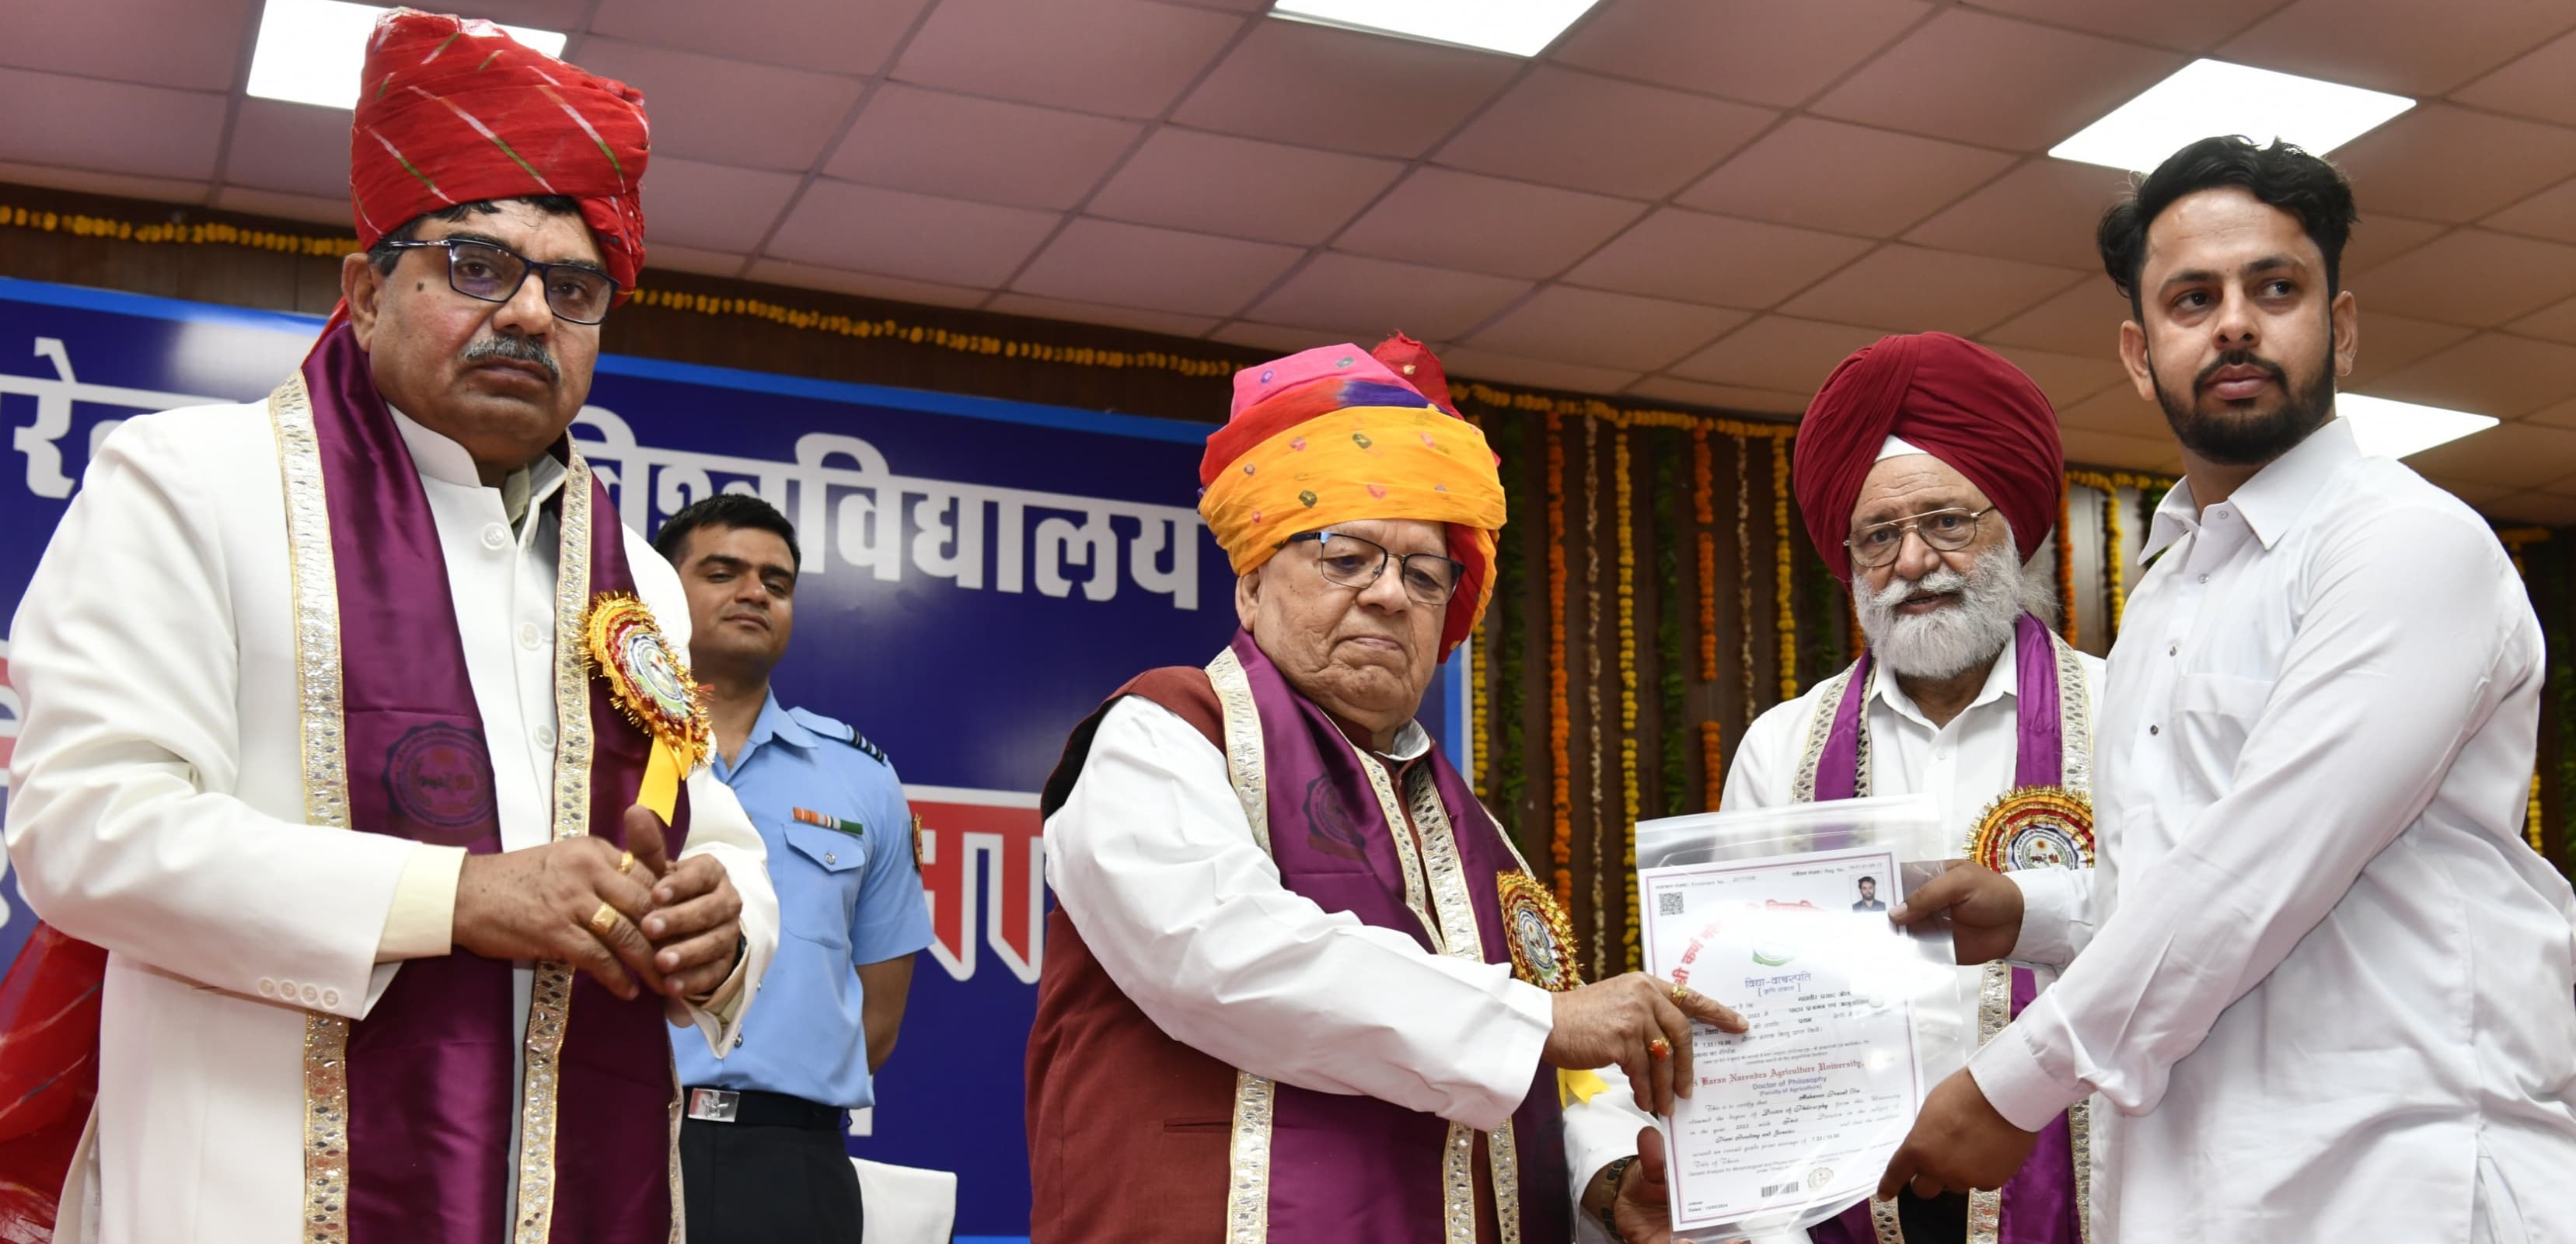 Hon'ble Governor presided over 6th Convocation of SKN Agriculture University, Jobner.